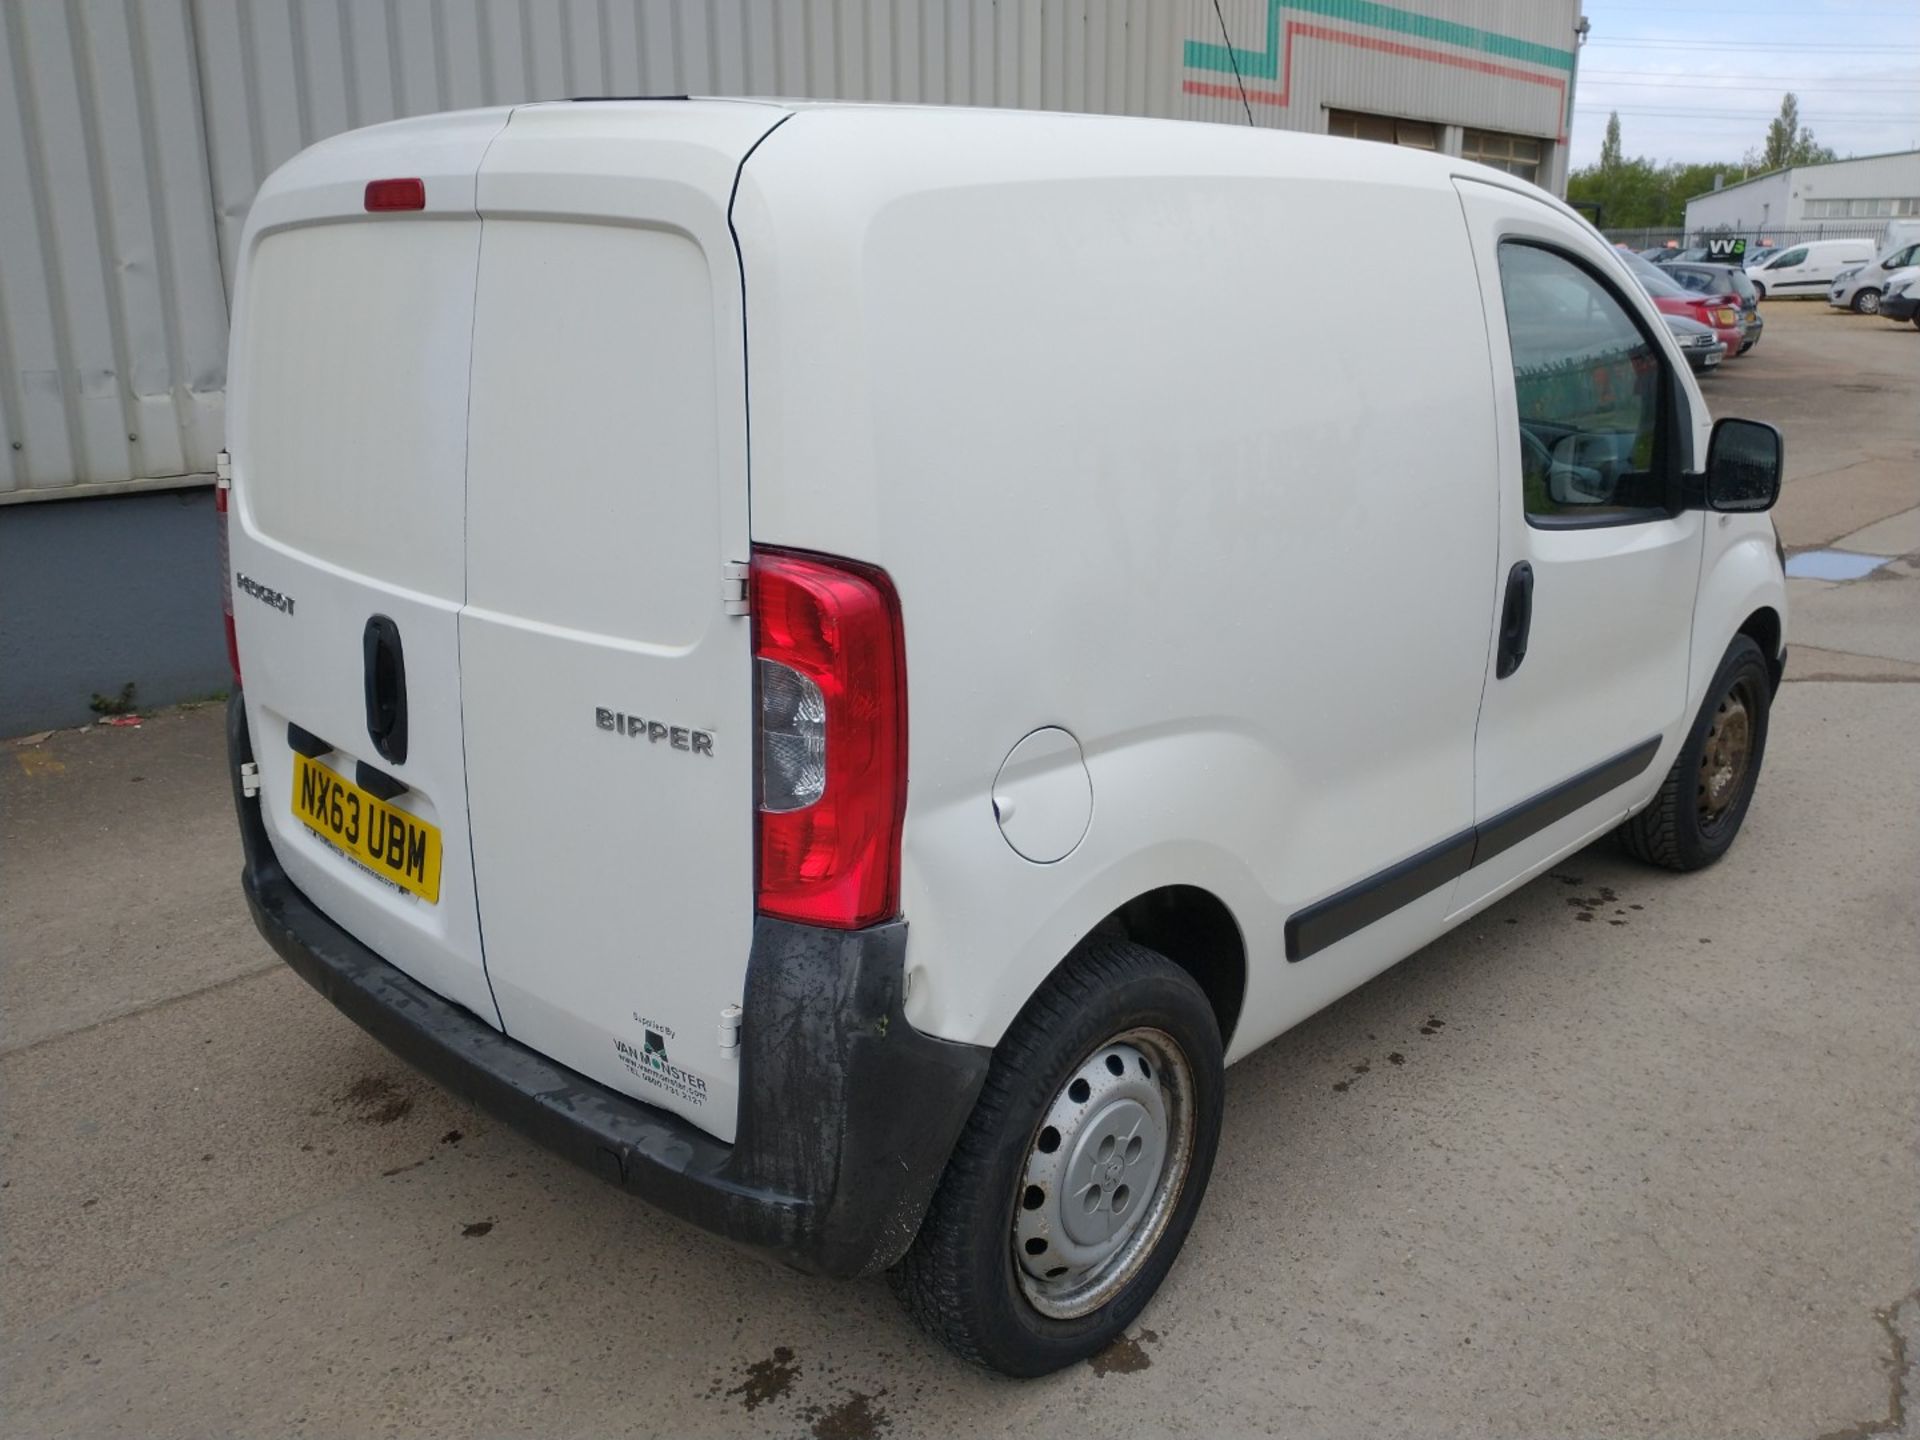 2013 Peugeot Bipper S Hdi Panel Van - CL505 - NO VAT ON THE HAMMER - Location: Corby - Image 3 of 19